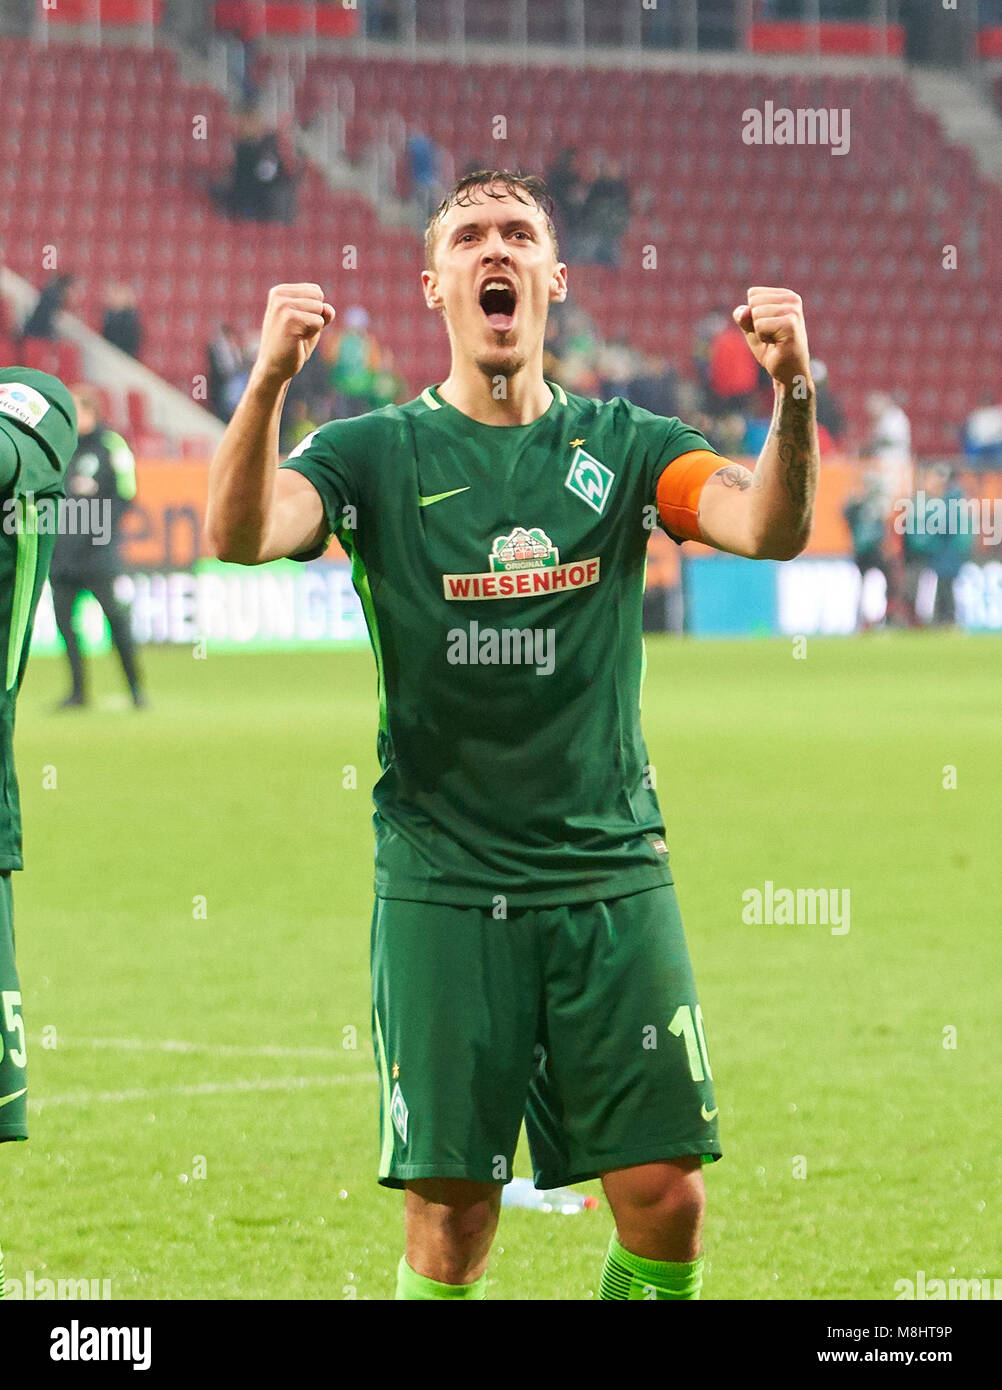 FC Augsburg Soccer, Augsburg, March 17, 2018  Max KRUSE, BRE 10 Cheering, joy, emotions, celebrating, laughing, cheering, rejoice, tearing up the arms, clenching the fist,  FC AUGSBURG - SV WERDER BREMEN 1-3 1.German Soccer League, matchday 27 , Augsburg, March 17, 2018,  Season 2017/2018 © Peter Schatz / Alamy Live News Stock Photo